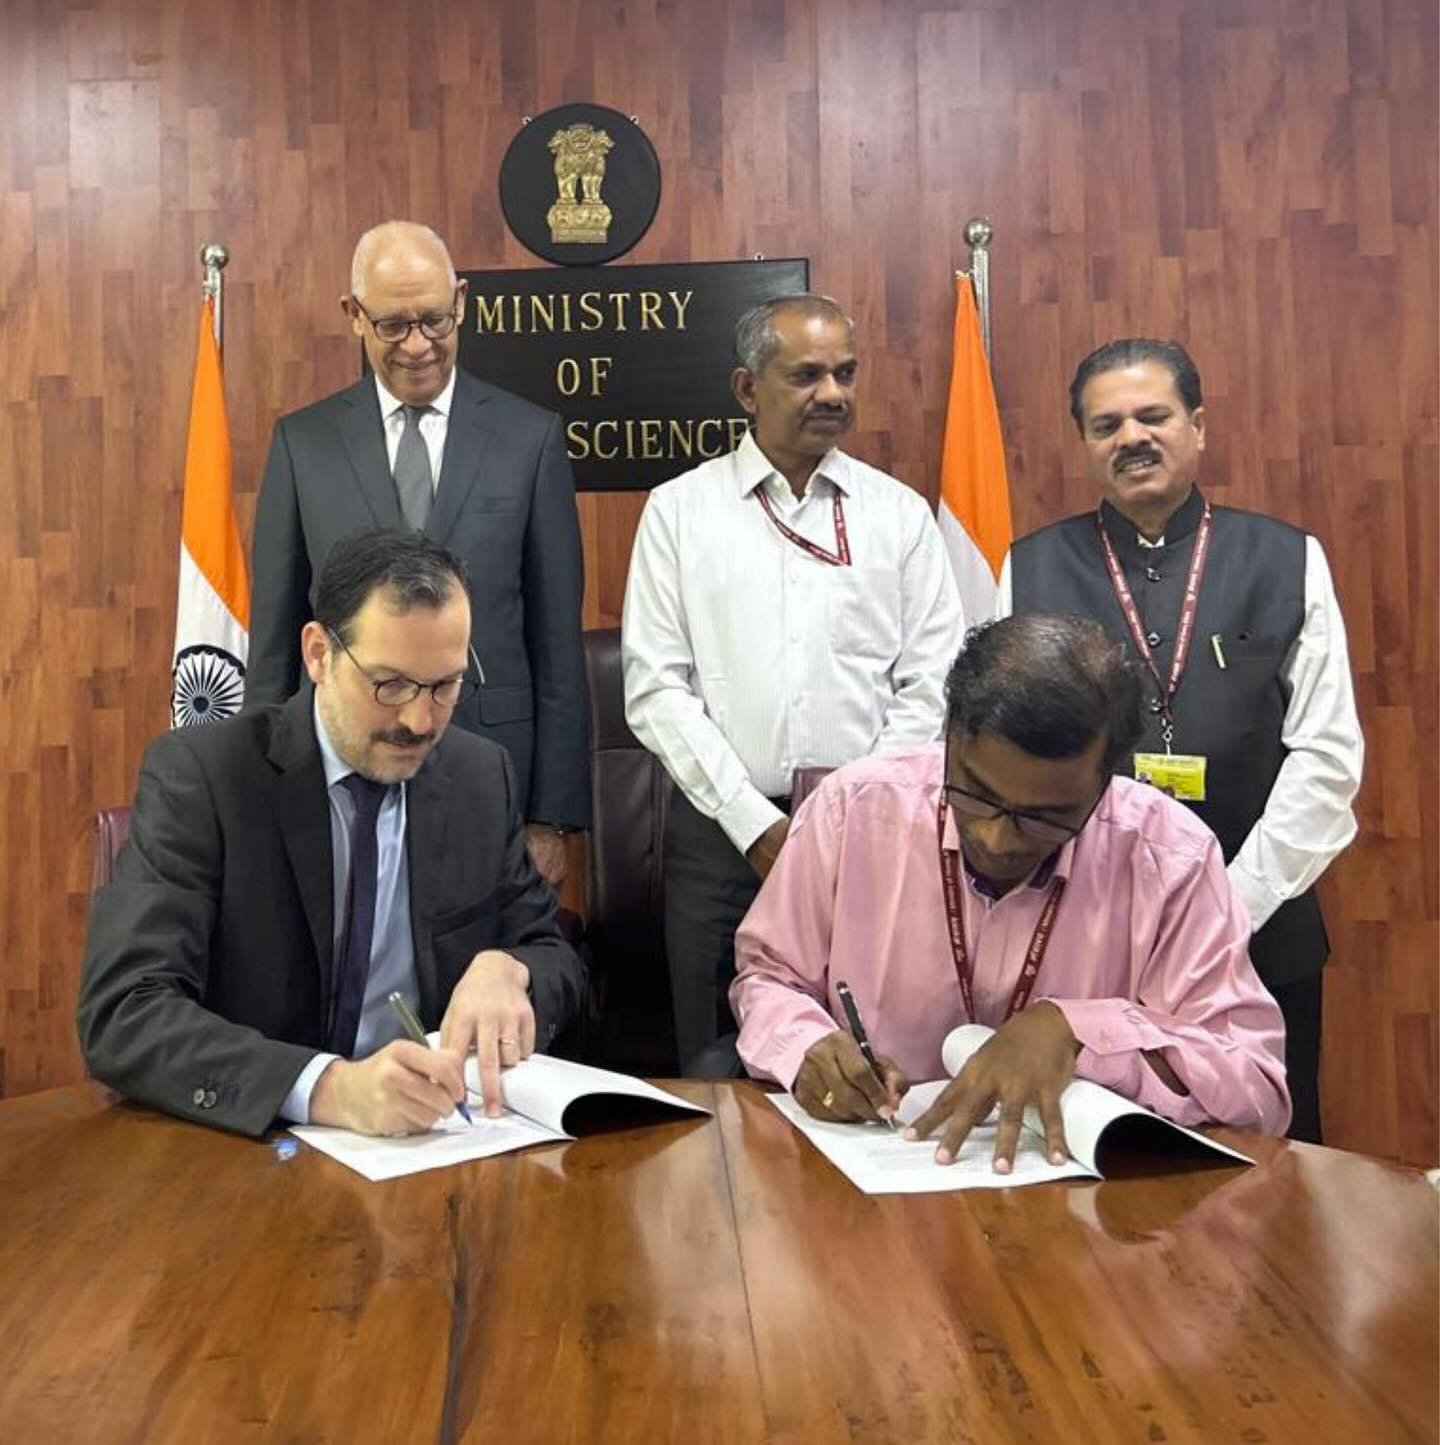 On 24th April, Ambassador David Puig signed in New Delhi on behalf of Gloria Ceballos, director of ONAMET, an MoU between ONAMET and the Indian Meteorological Department. The MoU was signed at the Ministry of Earth Sciences in the presence of Vice Mi